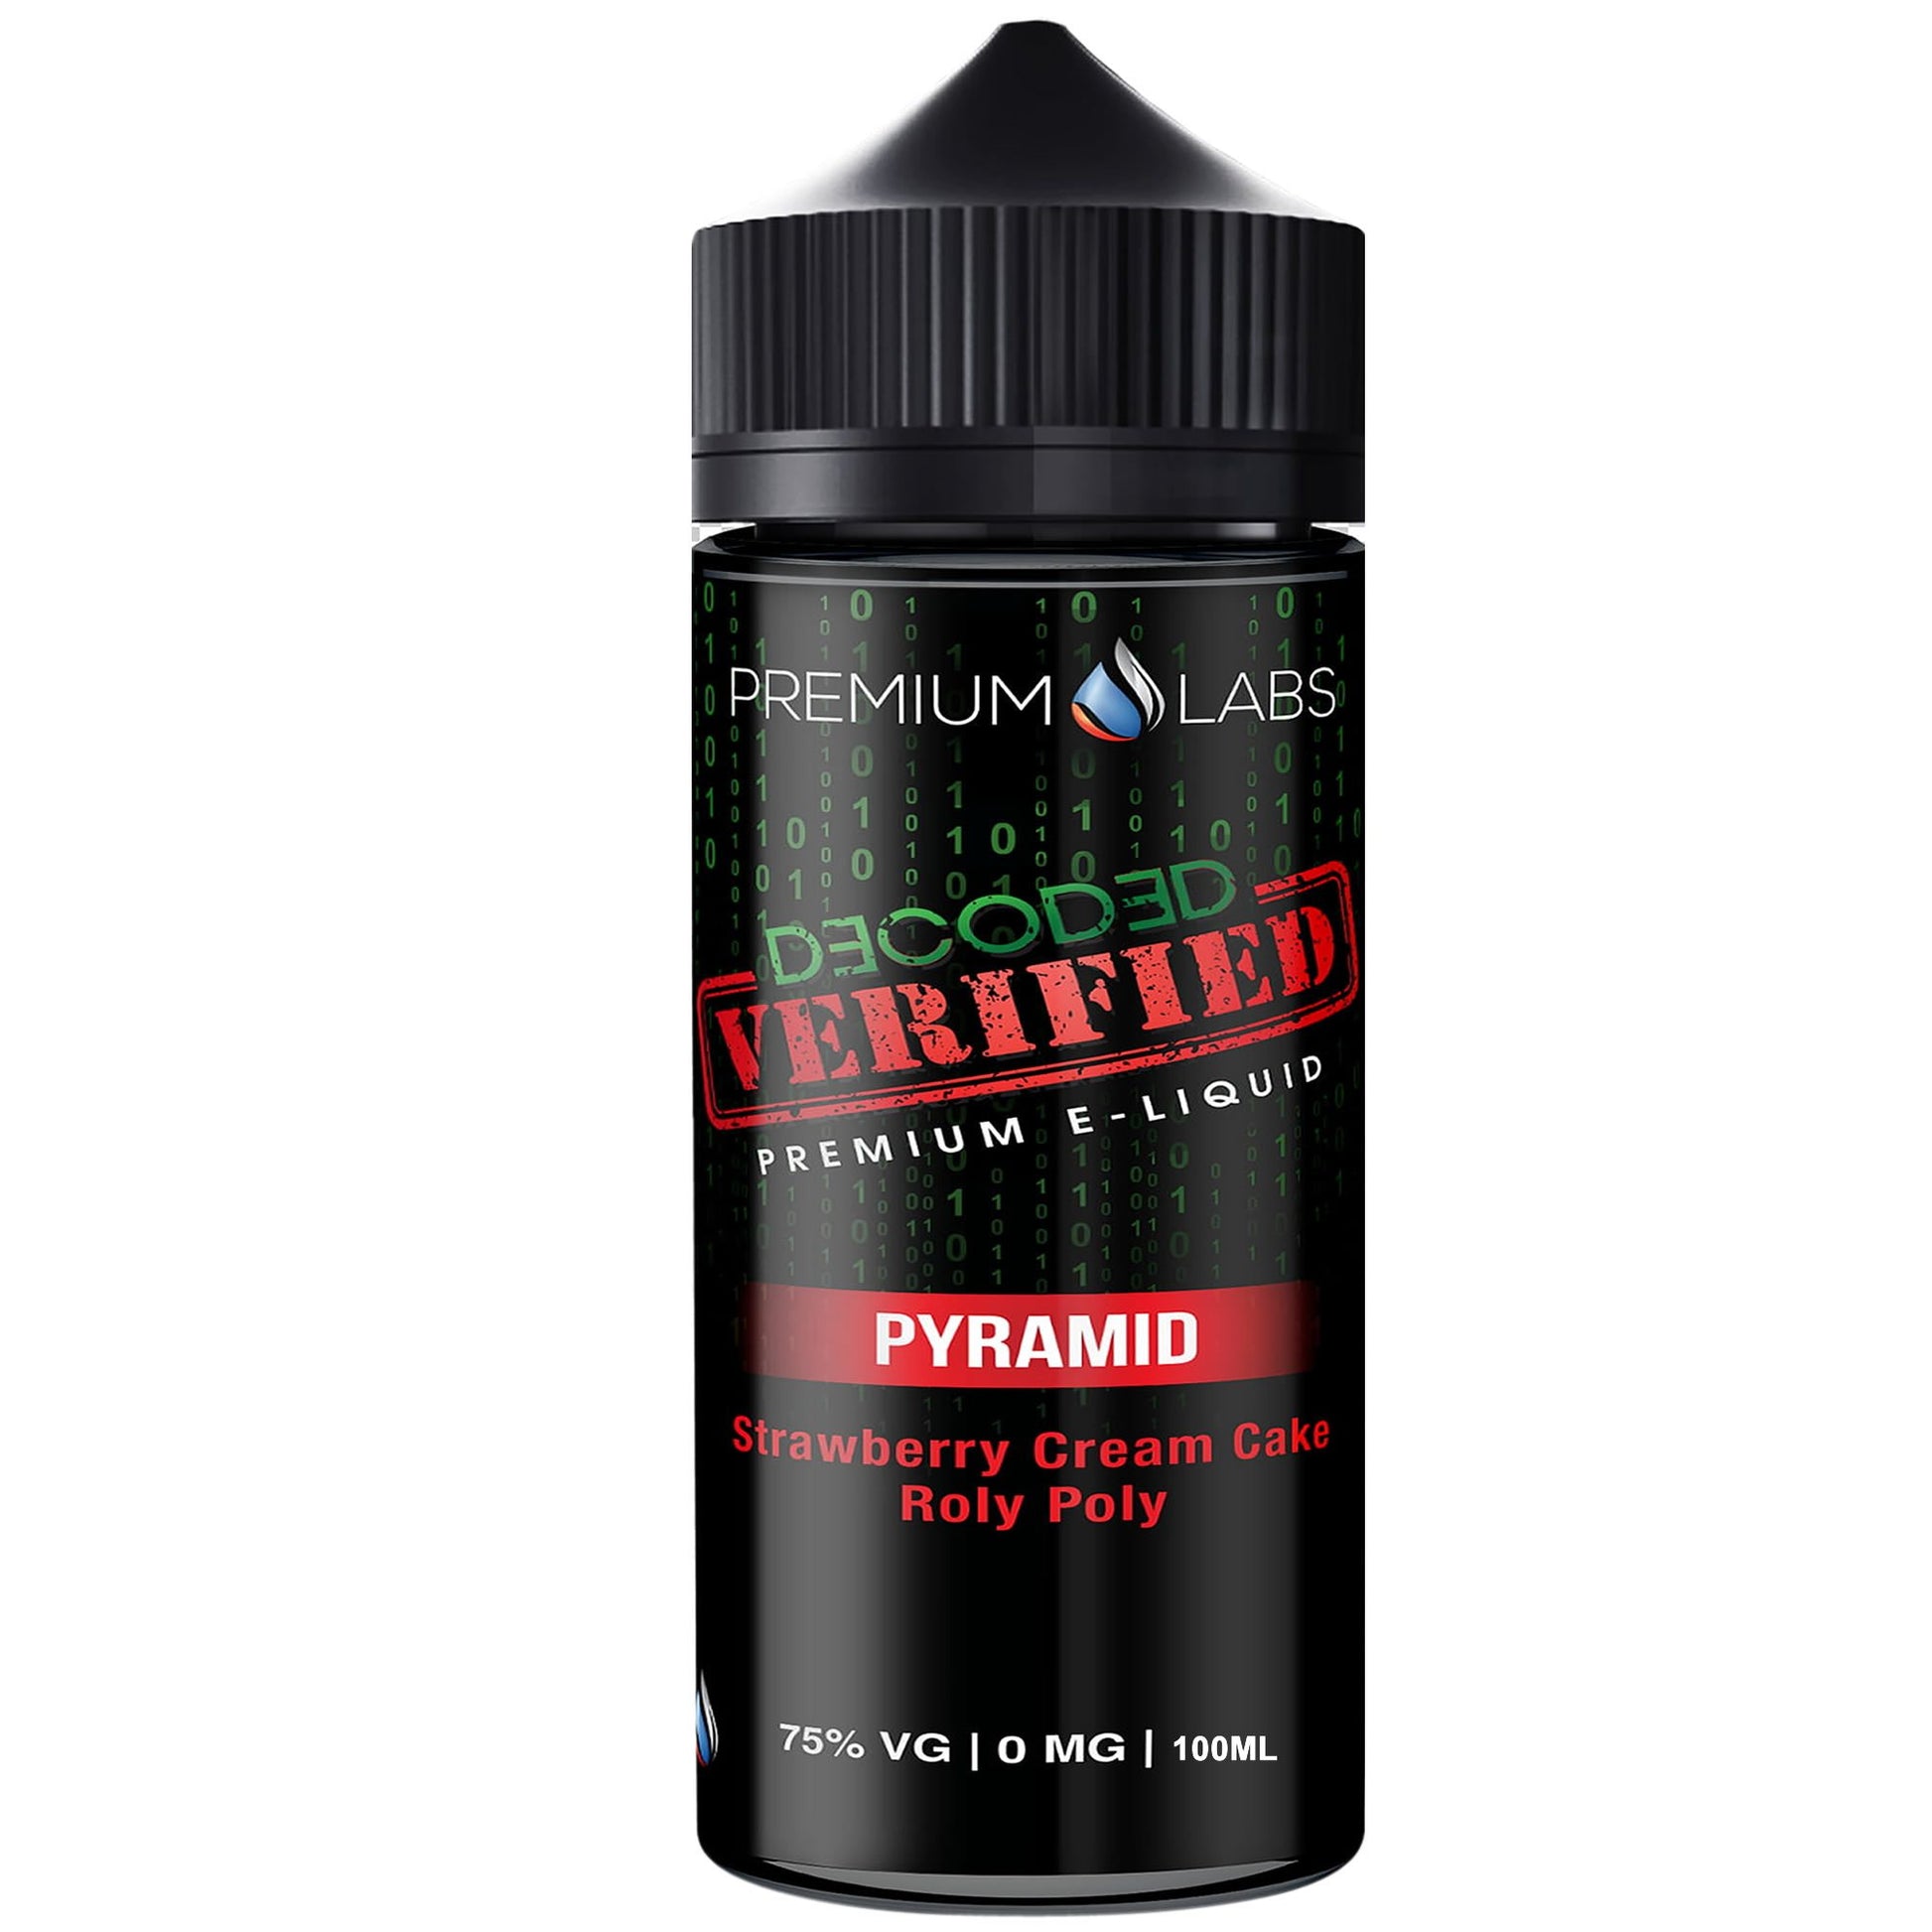 PYRAMID E LIQUID BY DECODED VERIFIED - PREMIUM LABS 100ML 75VG - Eliquids Outlet